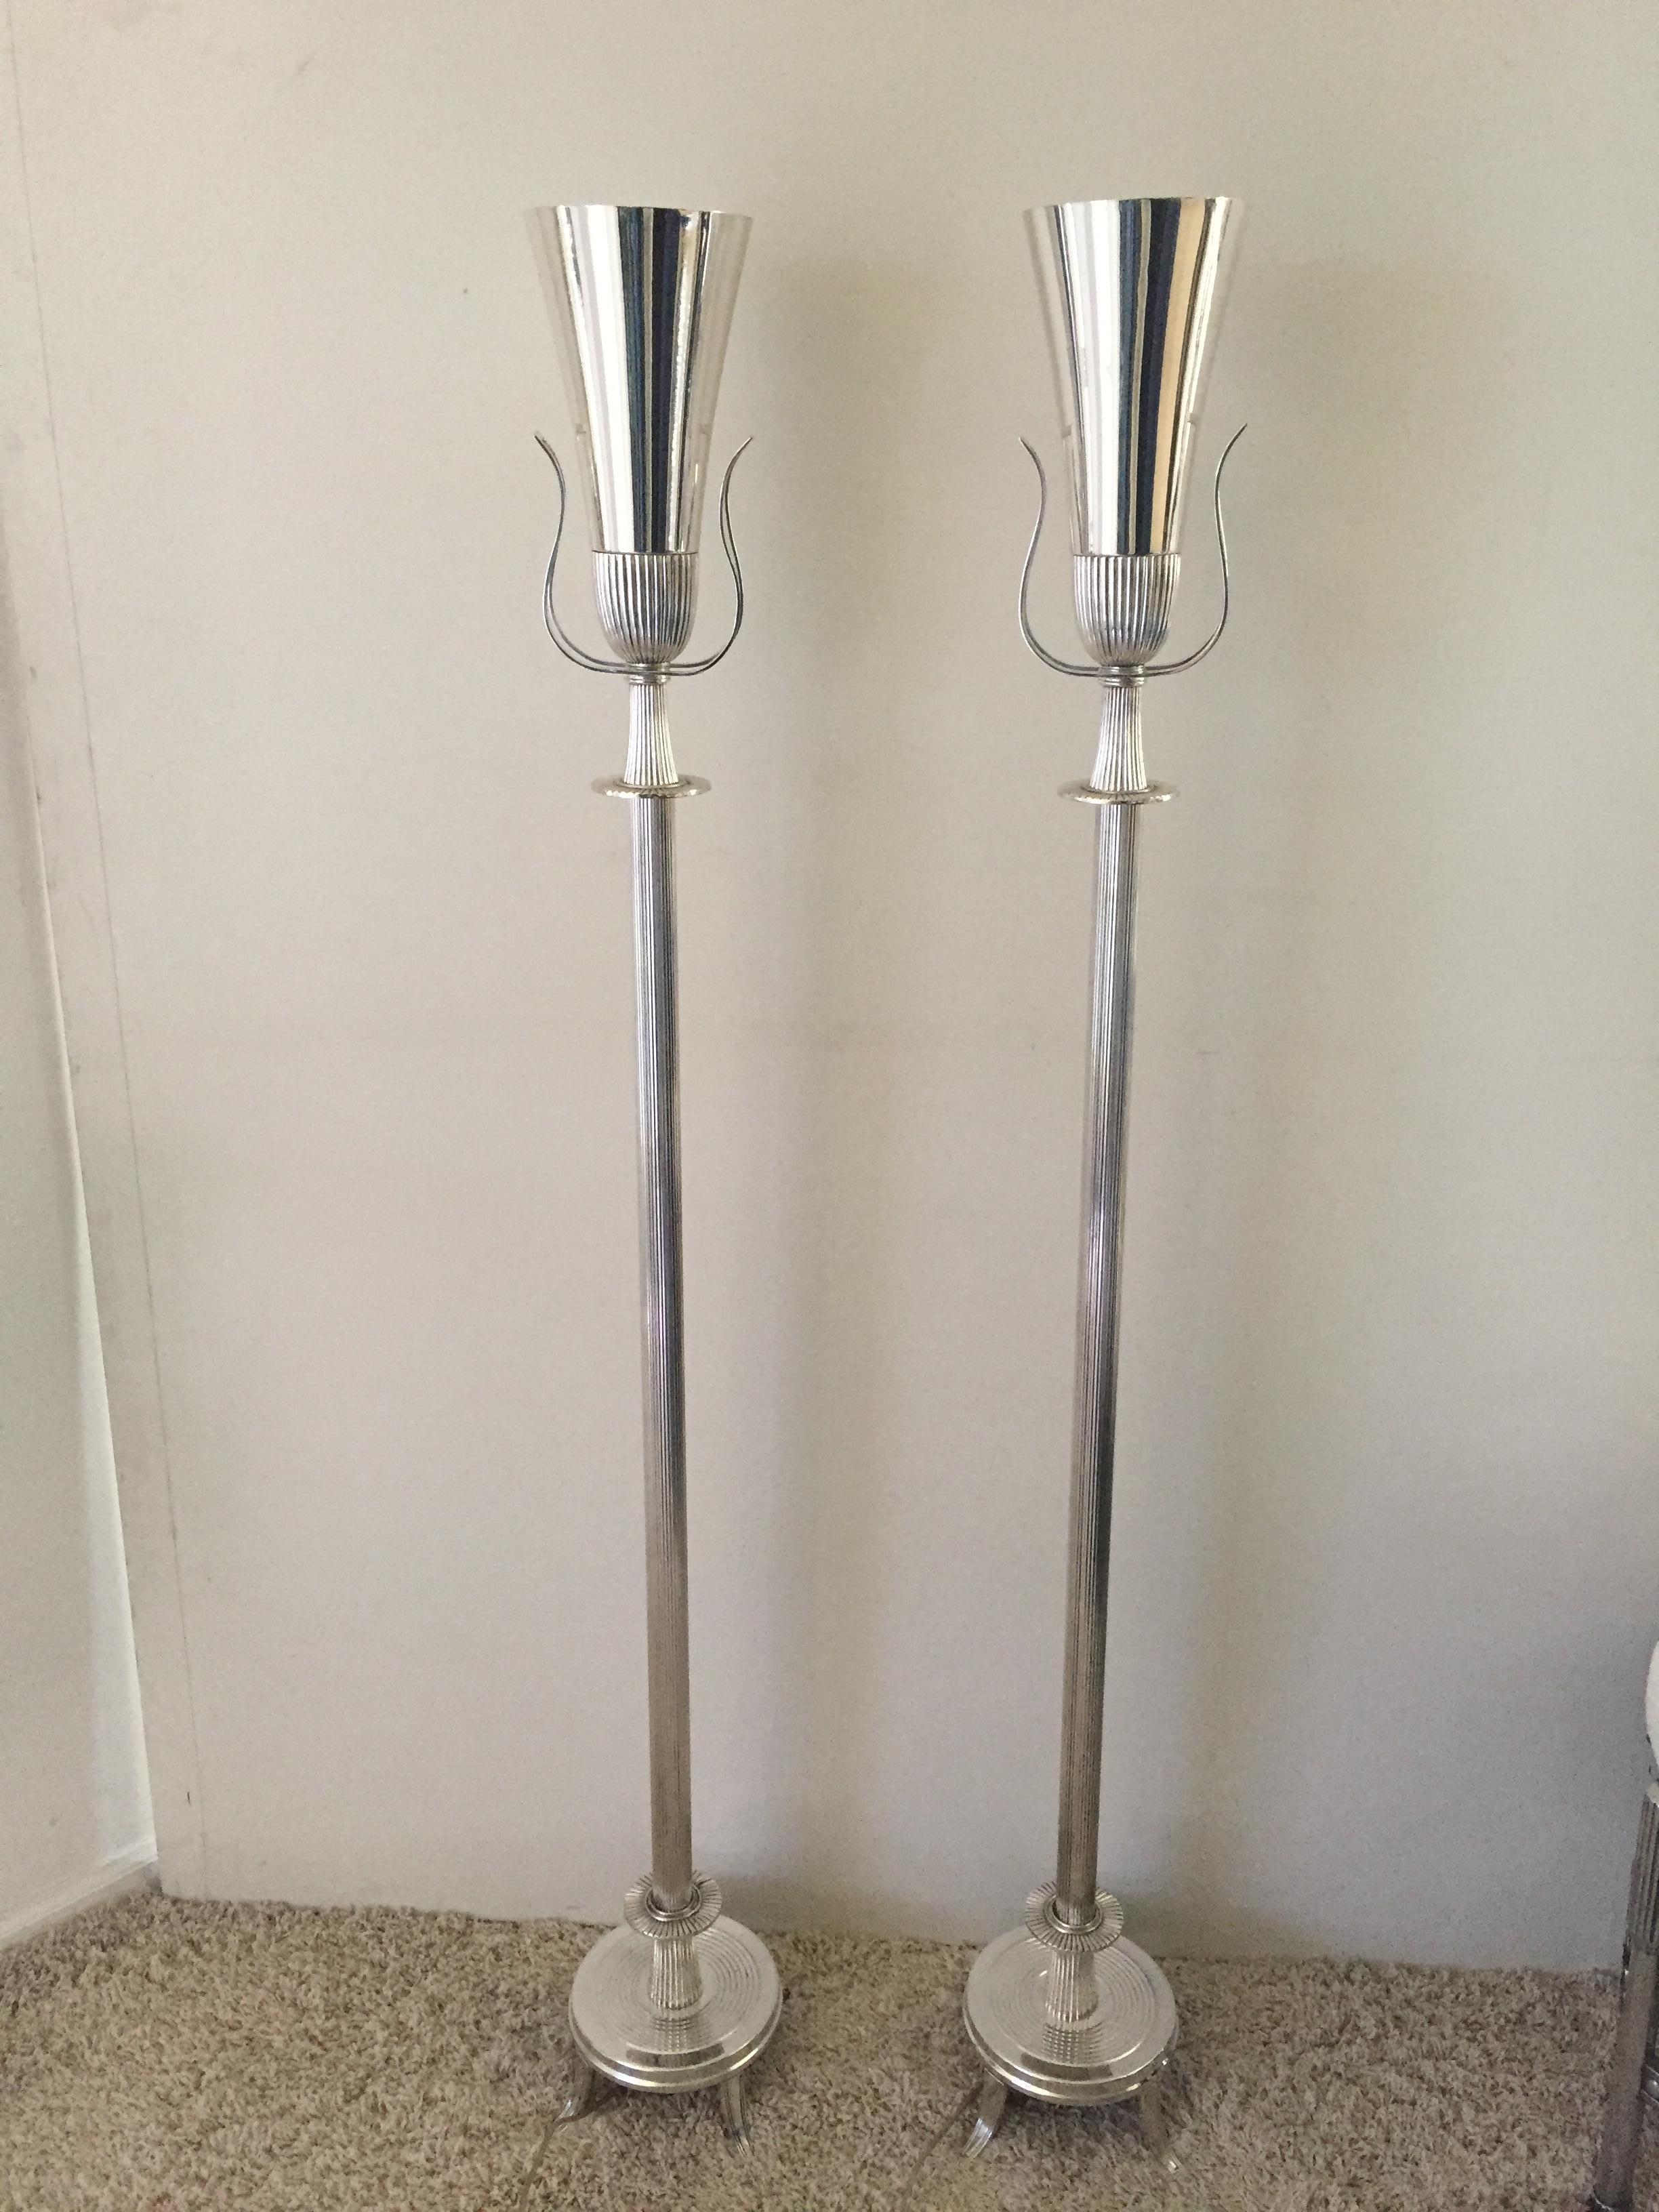 Pair of Tommi Parzinger nickel-plated Hollywood regency style torchiers, rewired and lacquered.